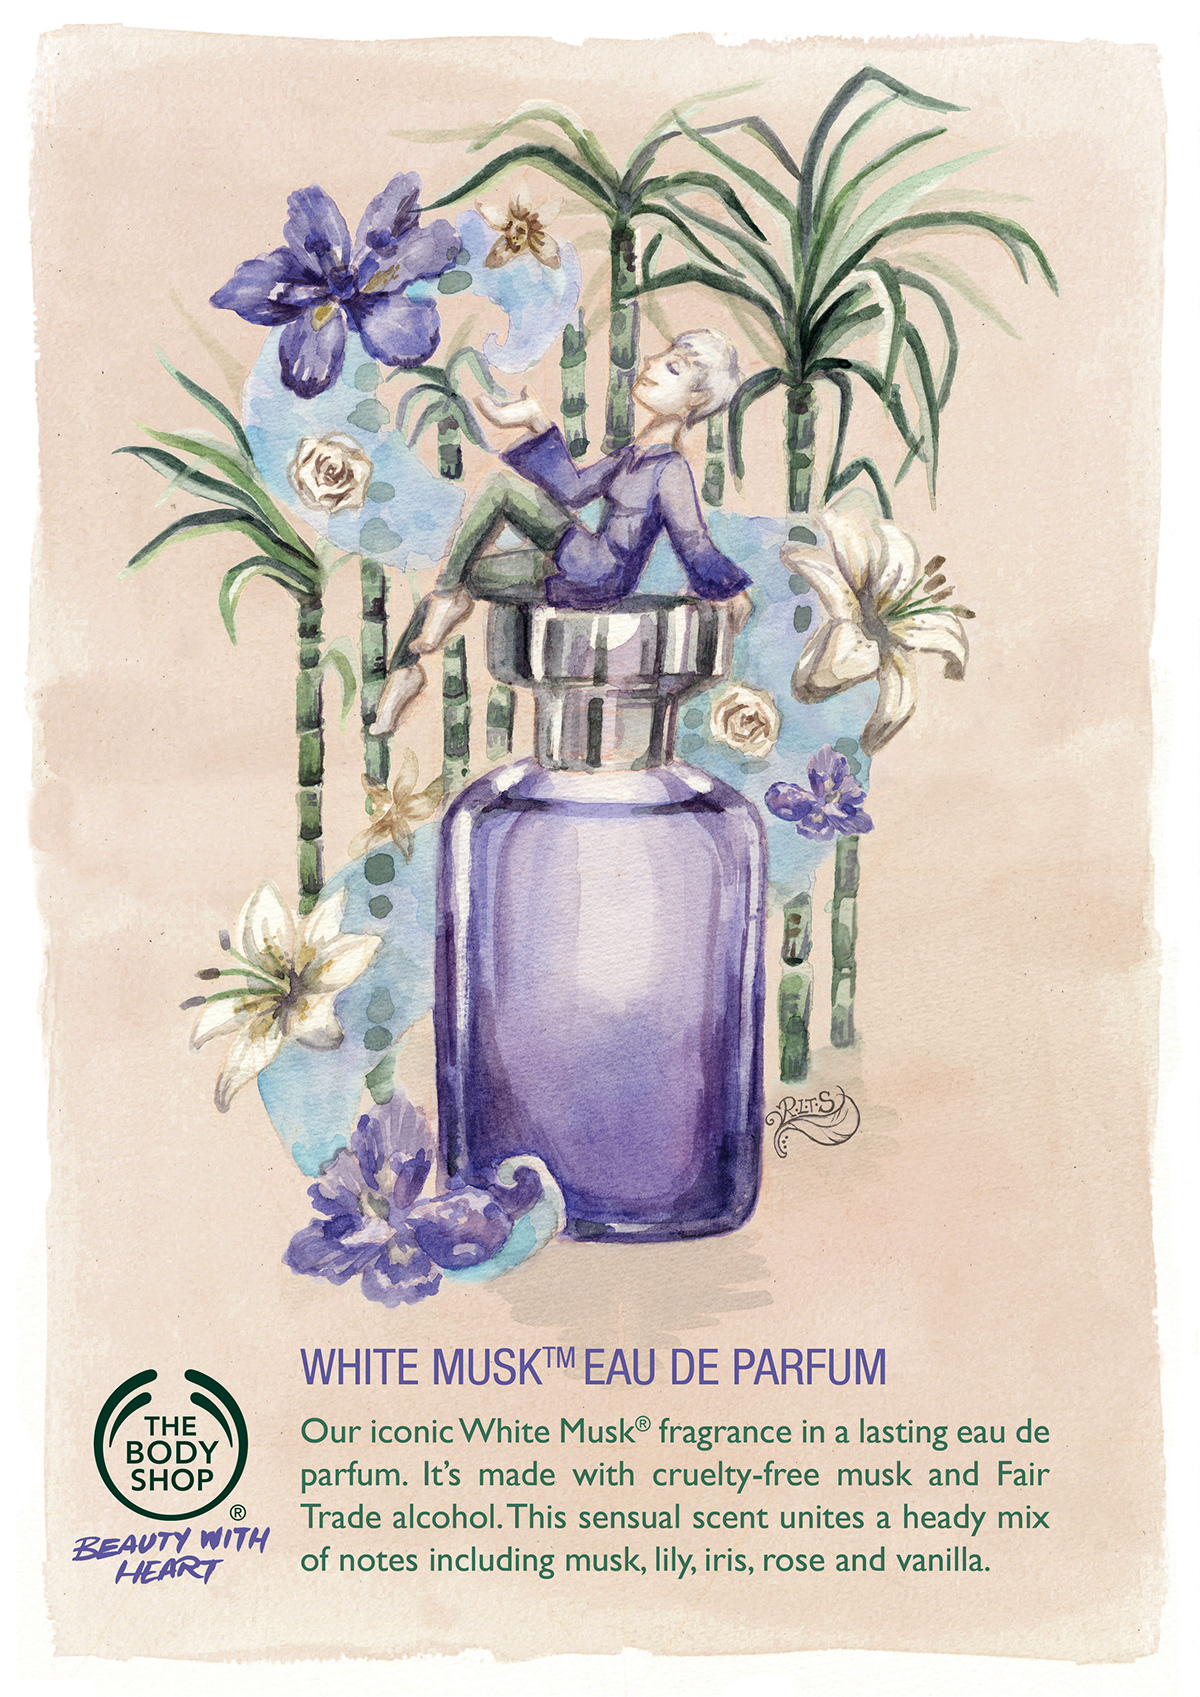 fair trade body shop D and AD poster design graphic Watercolours Nature ingredients plants